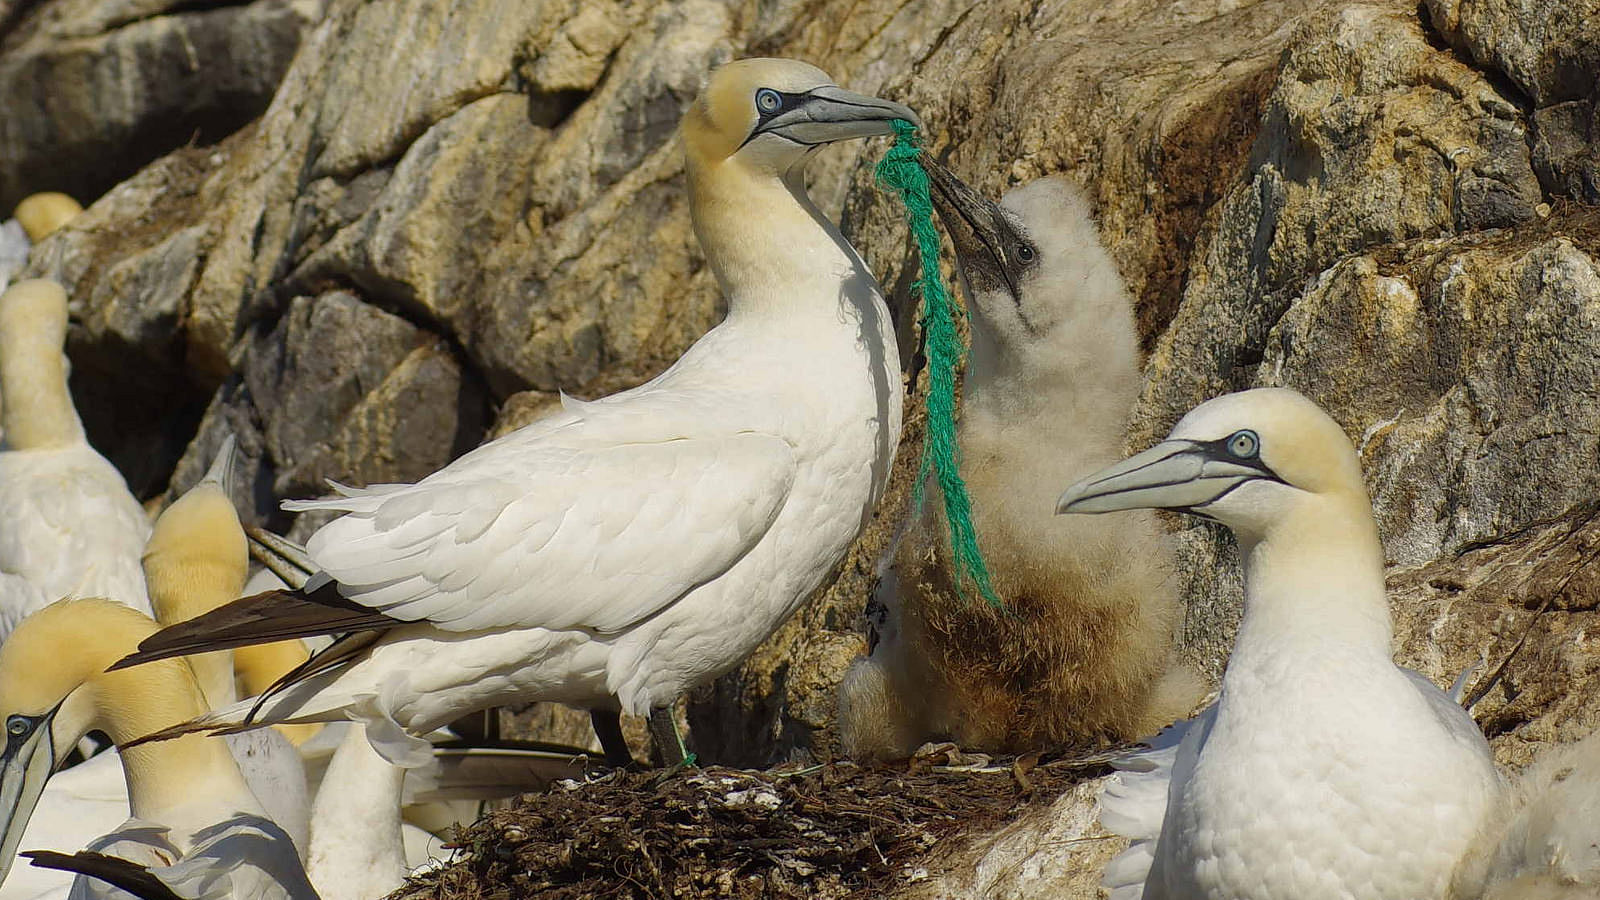 Birds and other species are vulnerable to carelessly disposed plastic. (Photo: Flickr/<a href="https://www.flickr.com/photos/snemann2/">Bo Eide</a>)